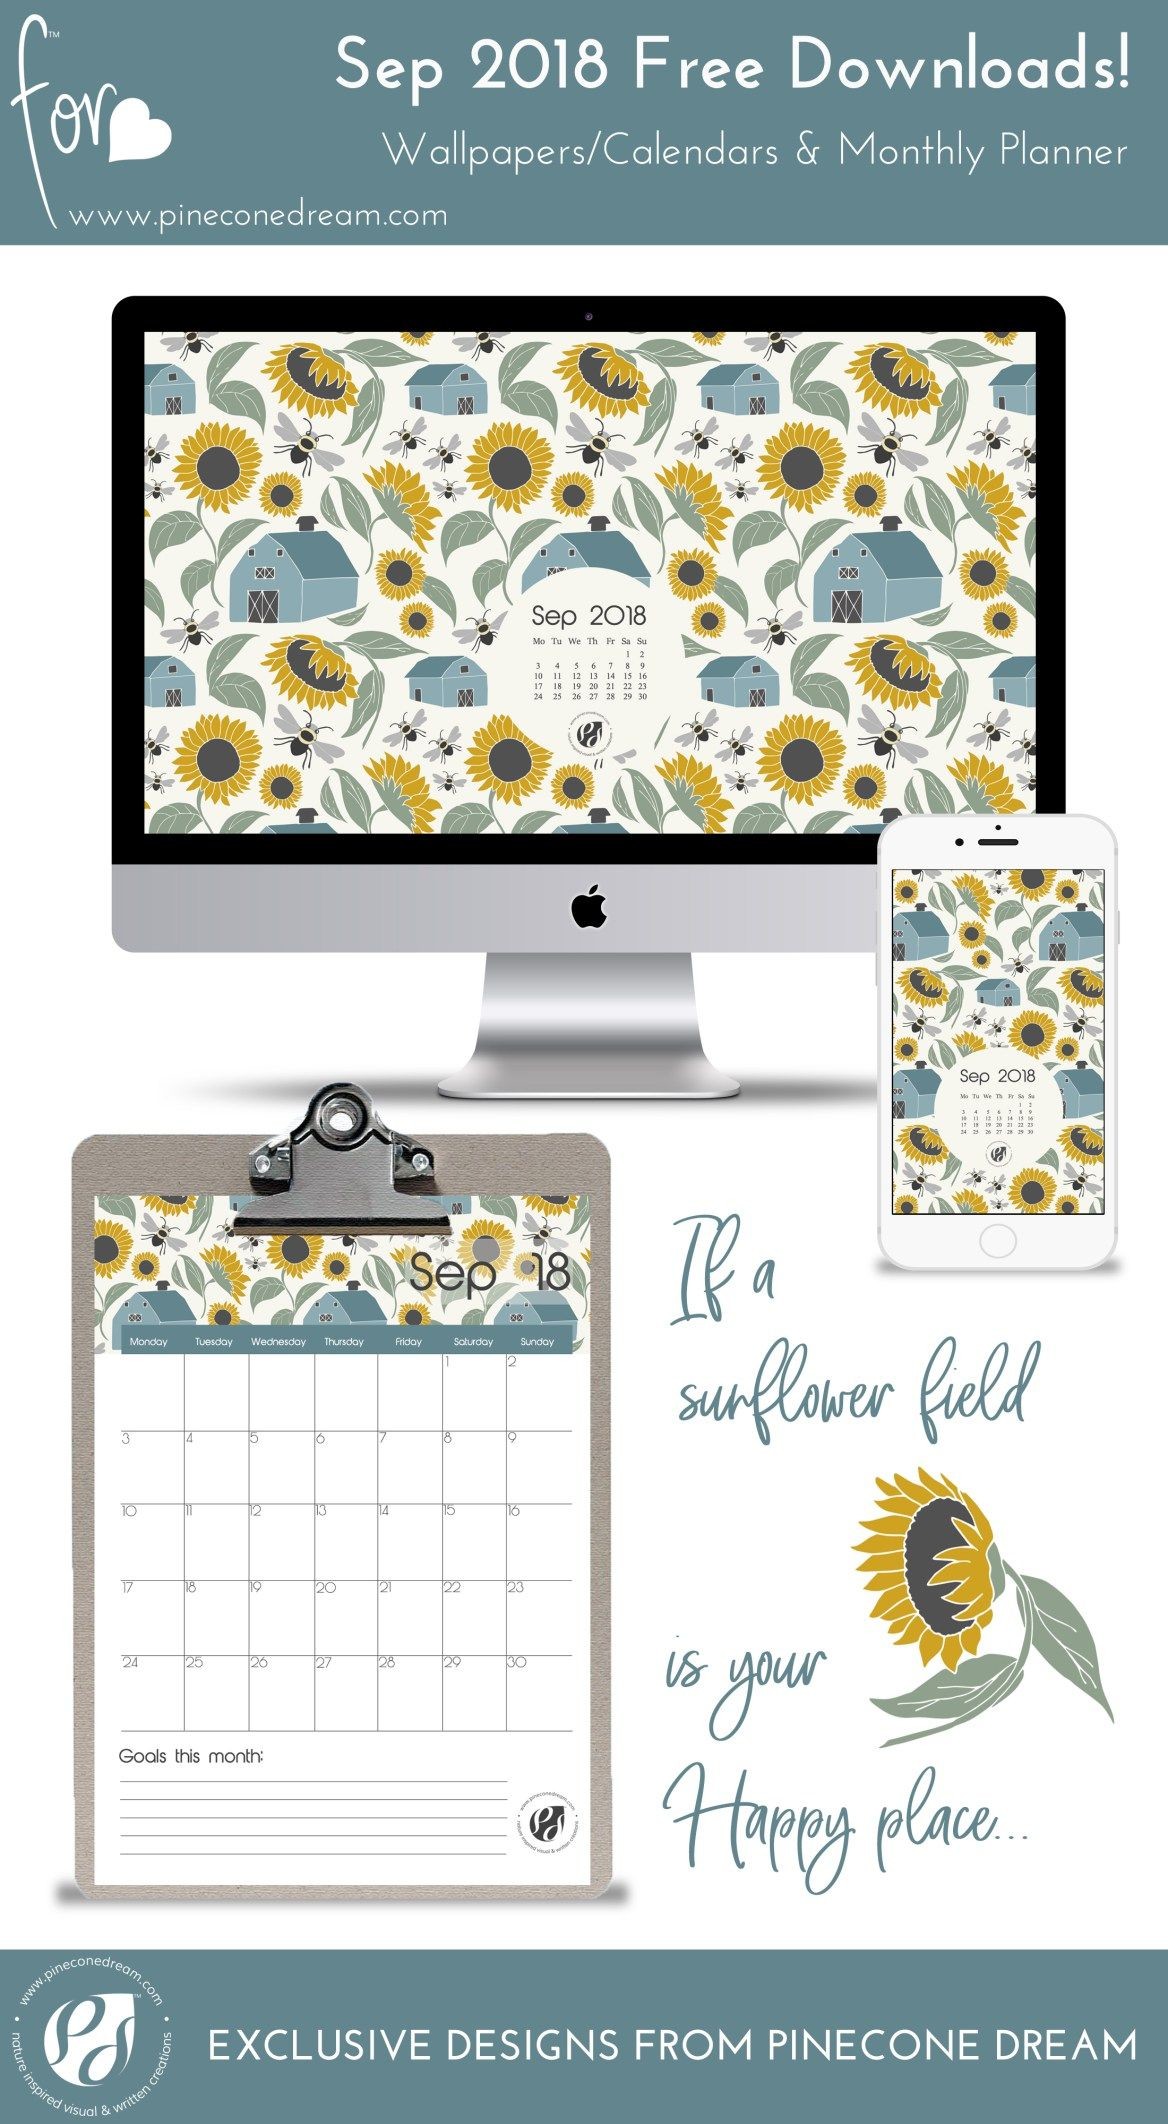 1168x2124 September 2018 Free Wallpapers/Calendars & Printable Planner, illustrated –  A Sunflower Field! | Pinecone Dream